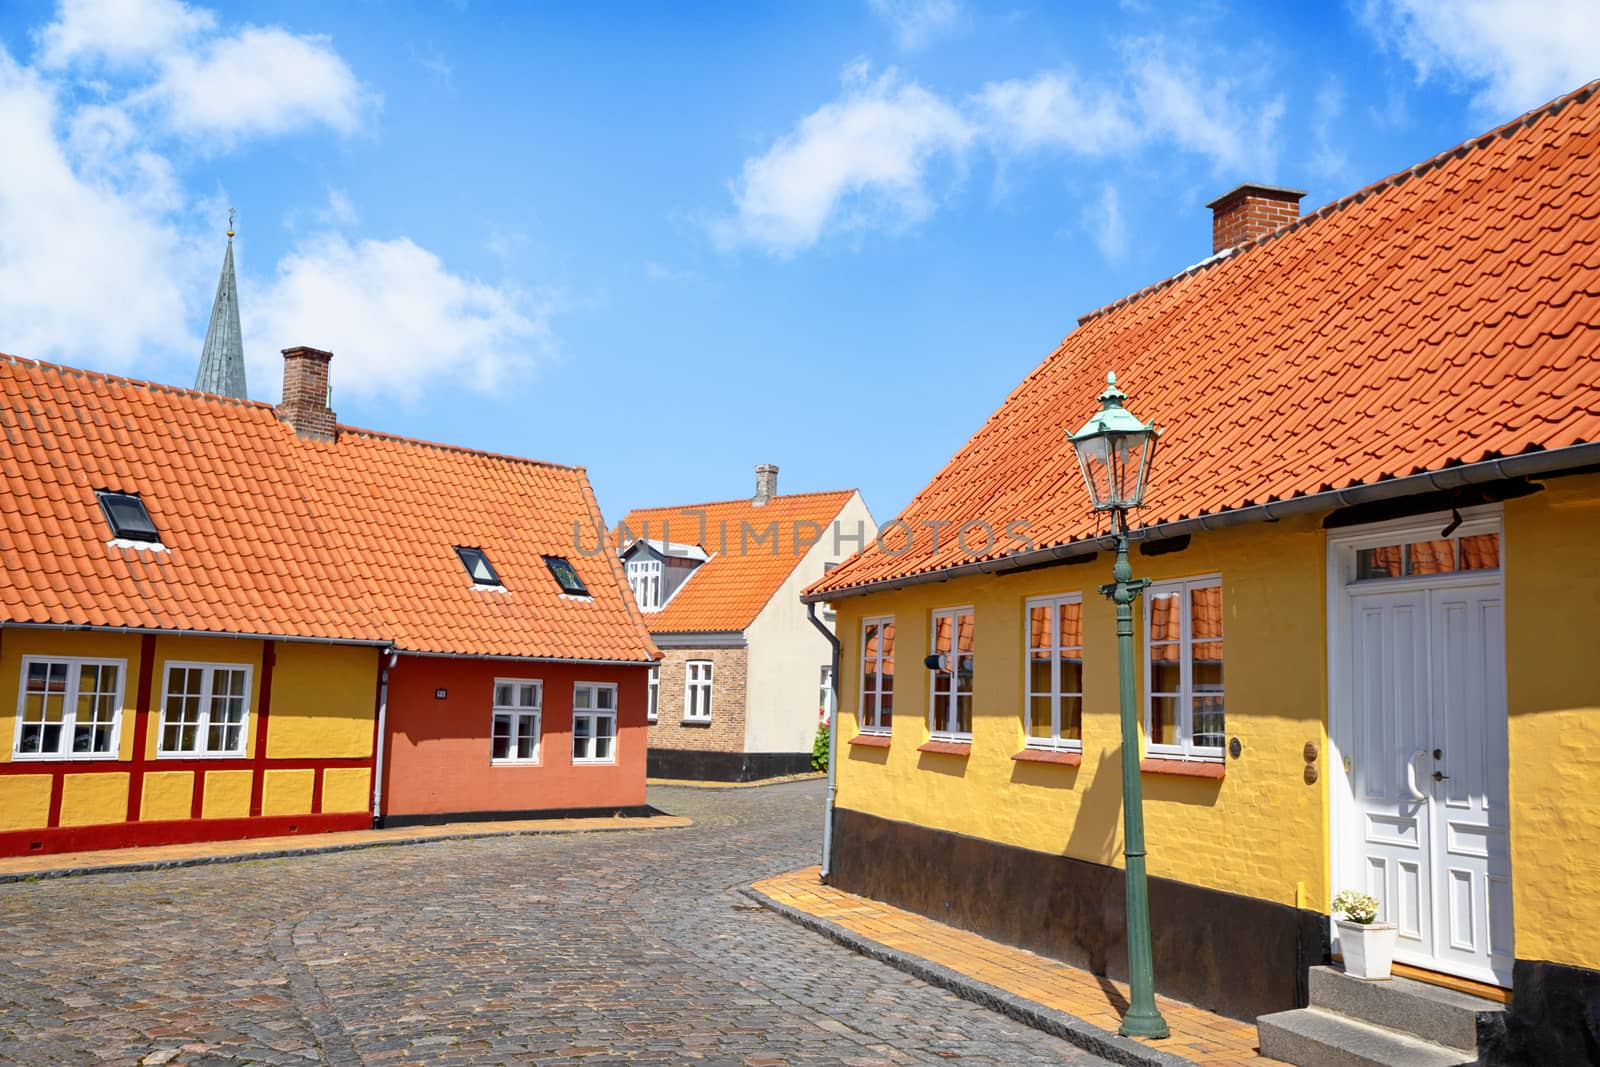 Street with yellow buildings and cooblestone by Sportactive